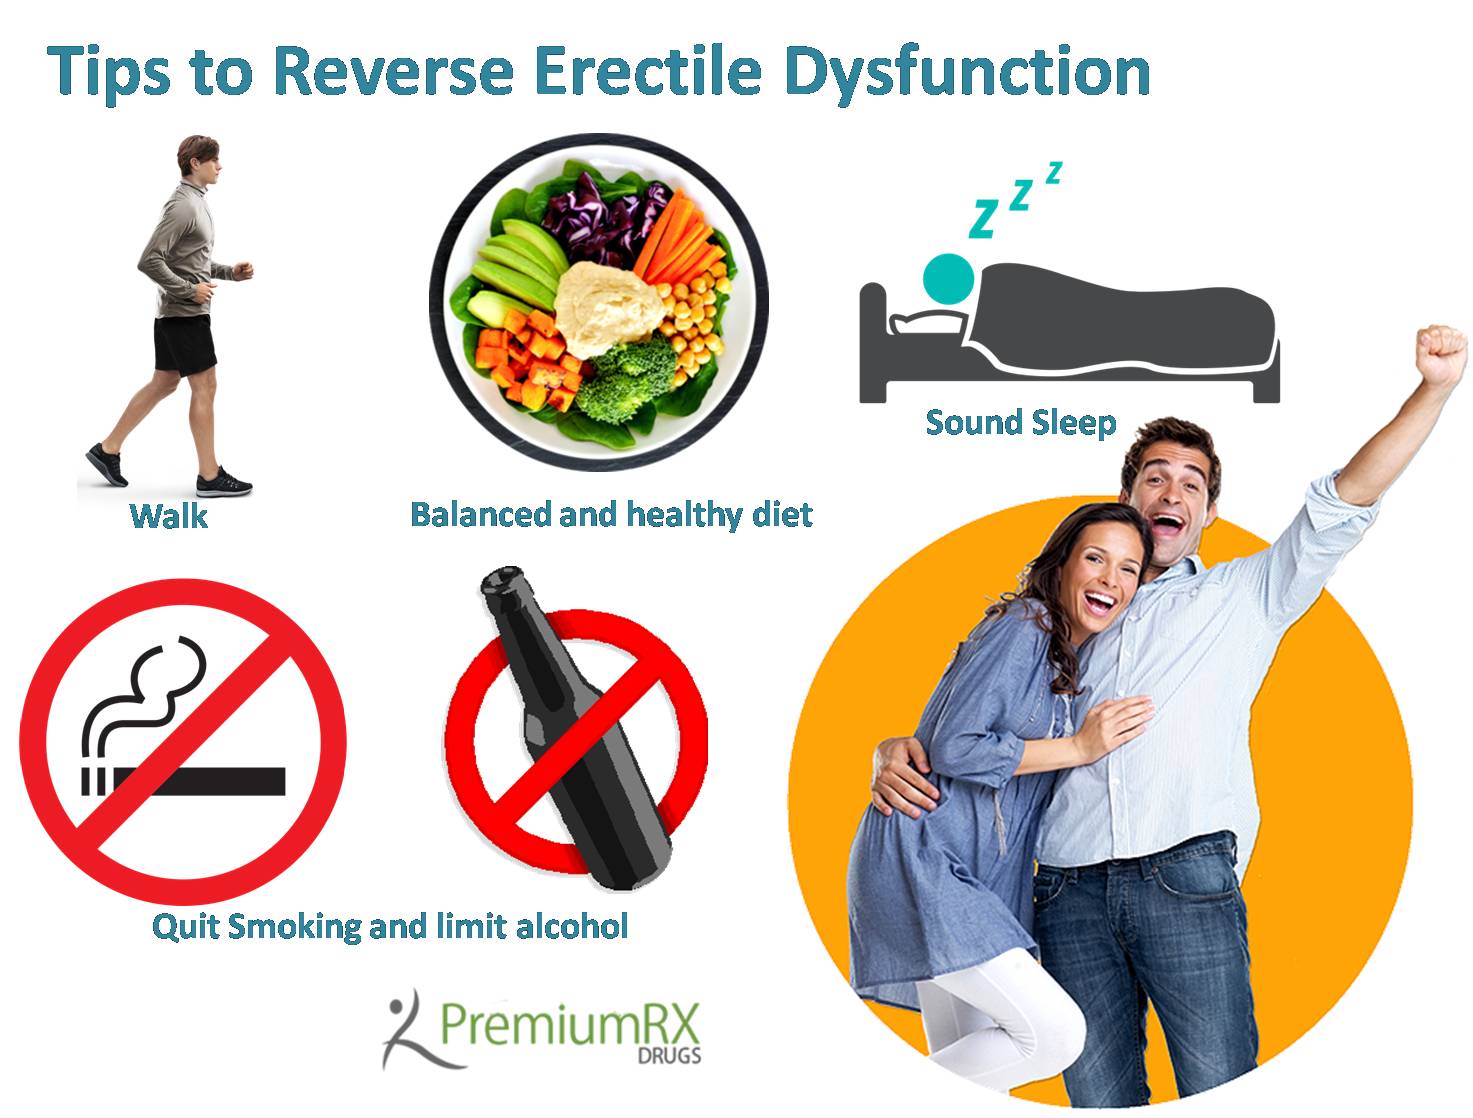 Can Erectile Dysfunction Be Reversed